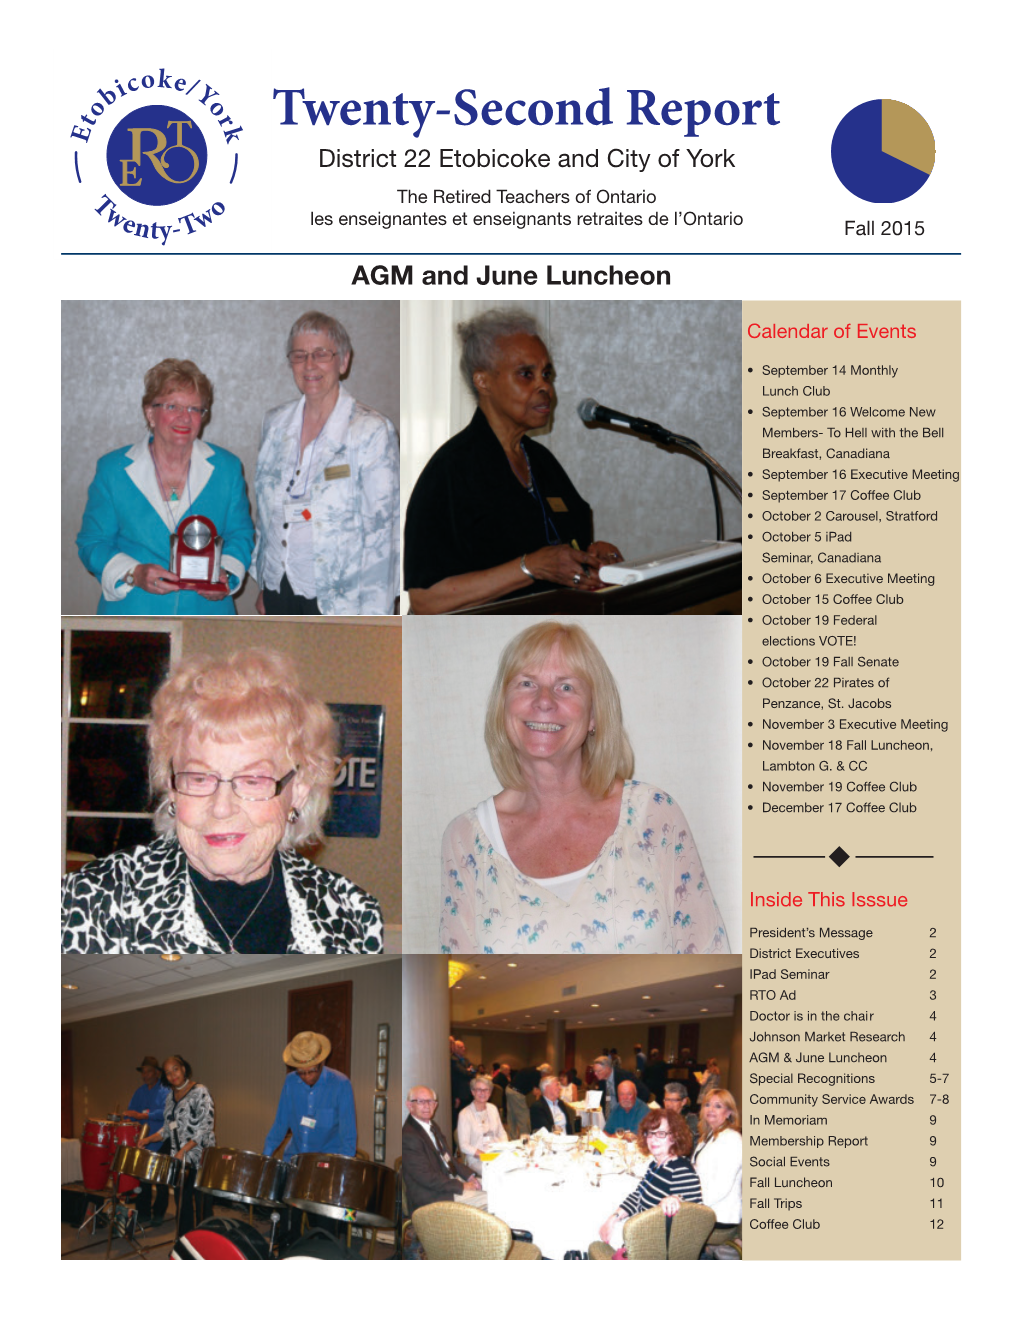 Fall 2015 AGM and June Luncheon